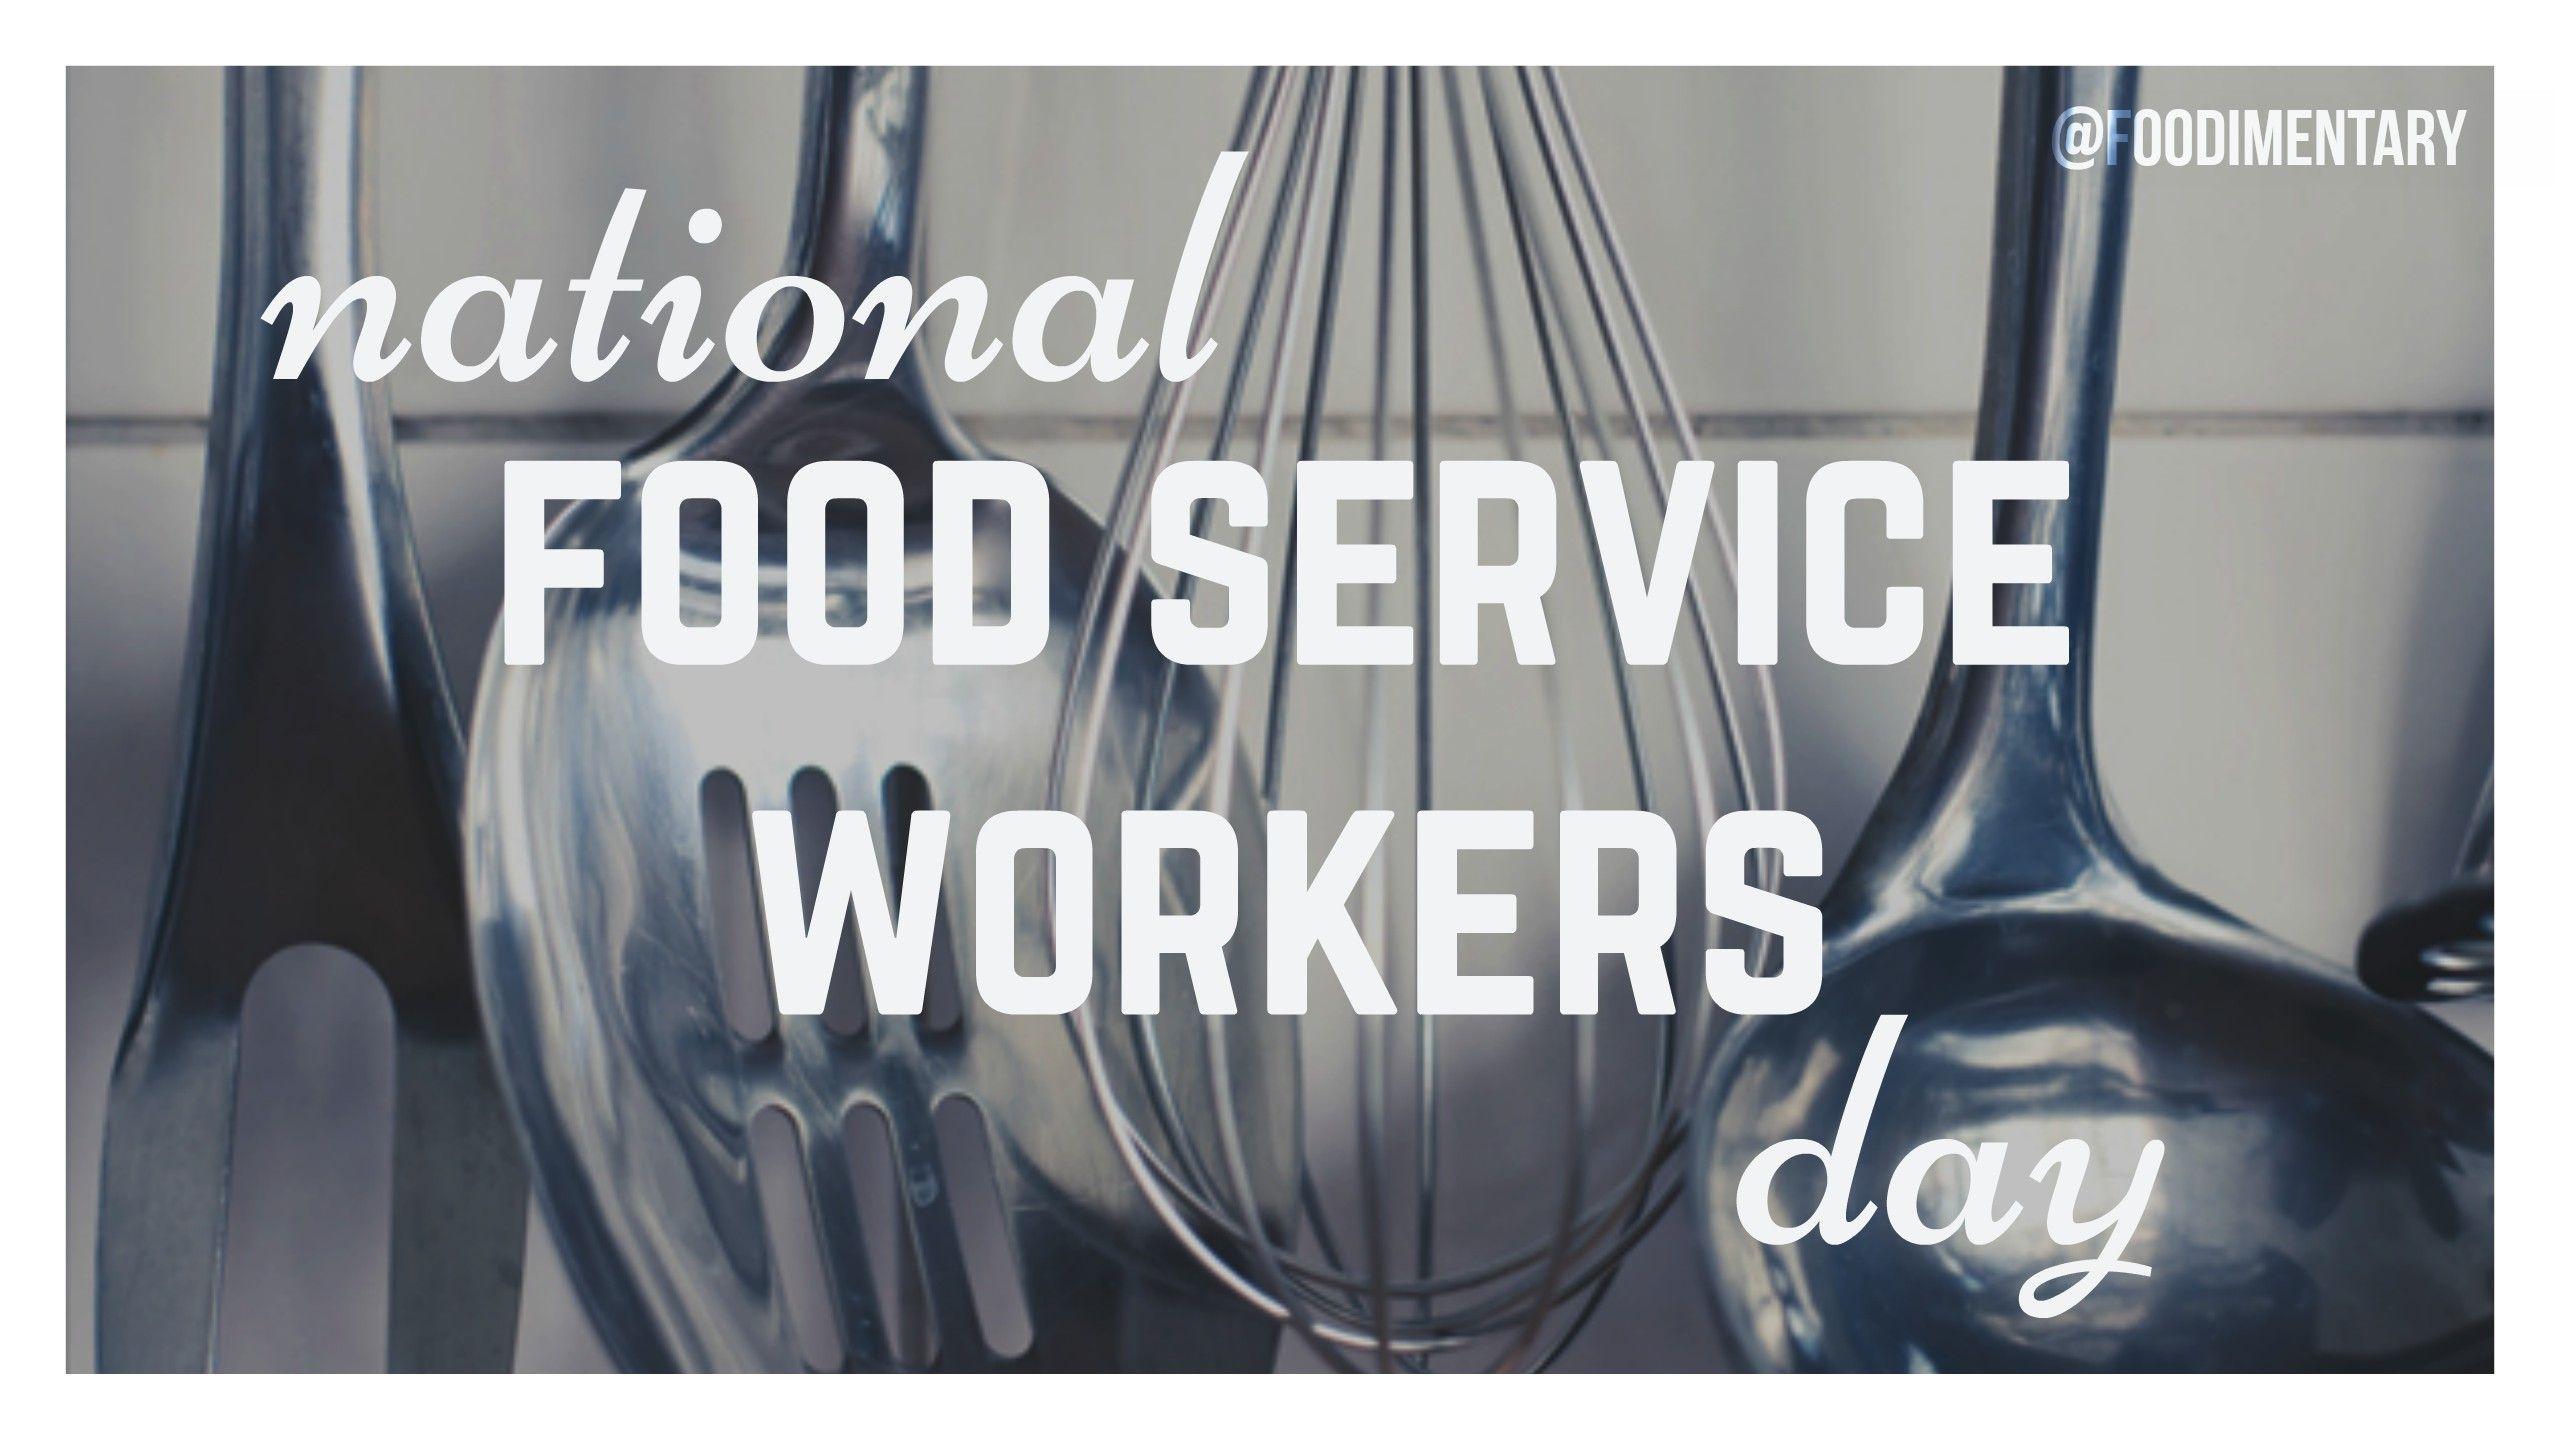 September 25th is National Food Service Workers Day. Foodimentary